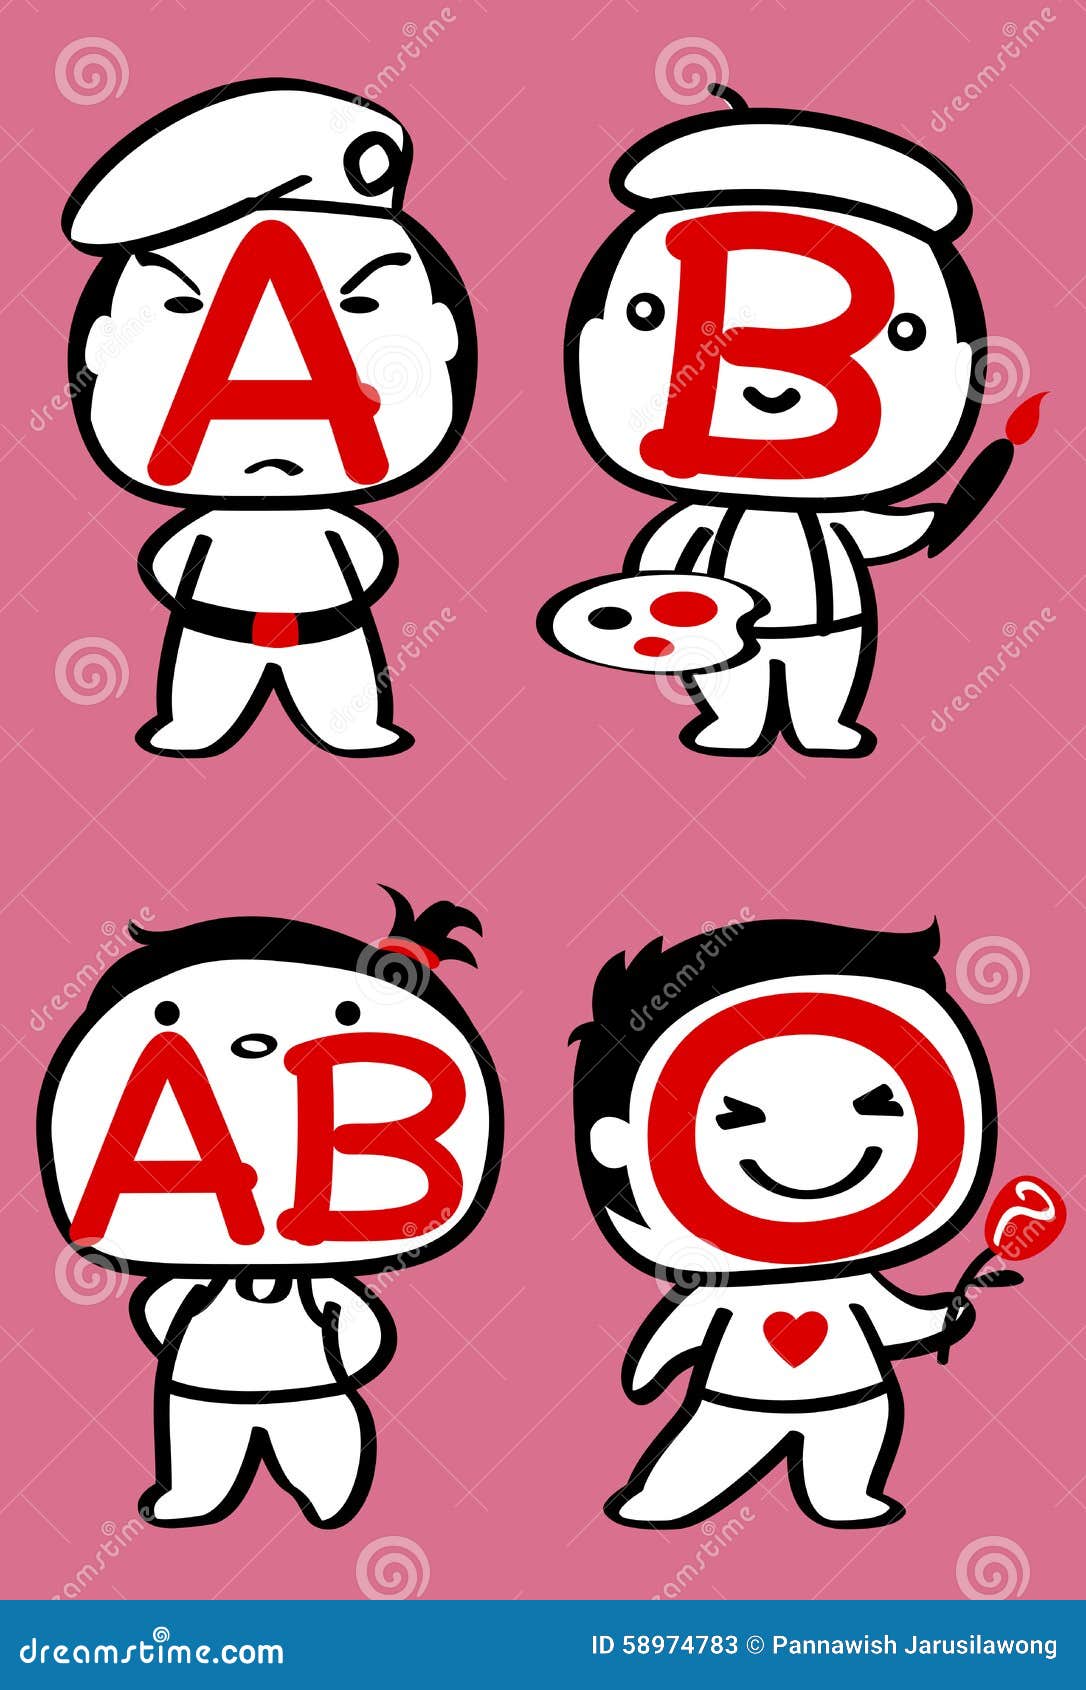 blood type clipart - photo #4